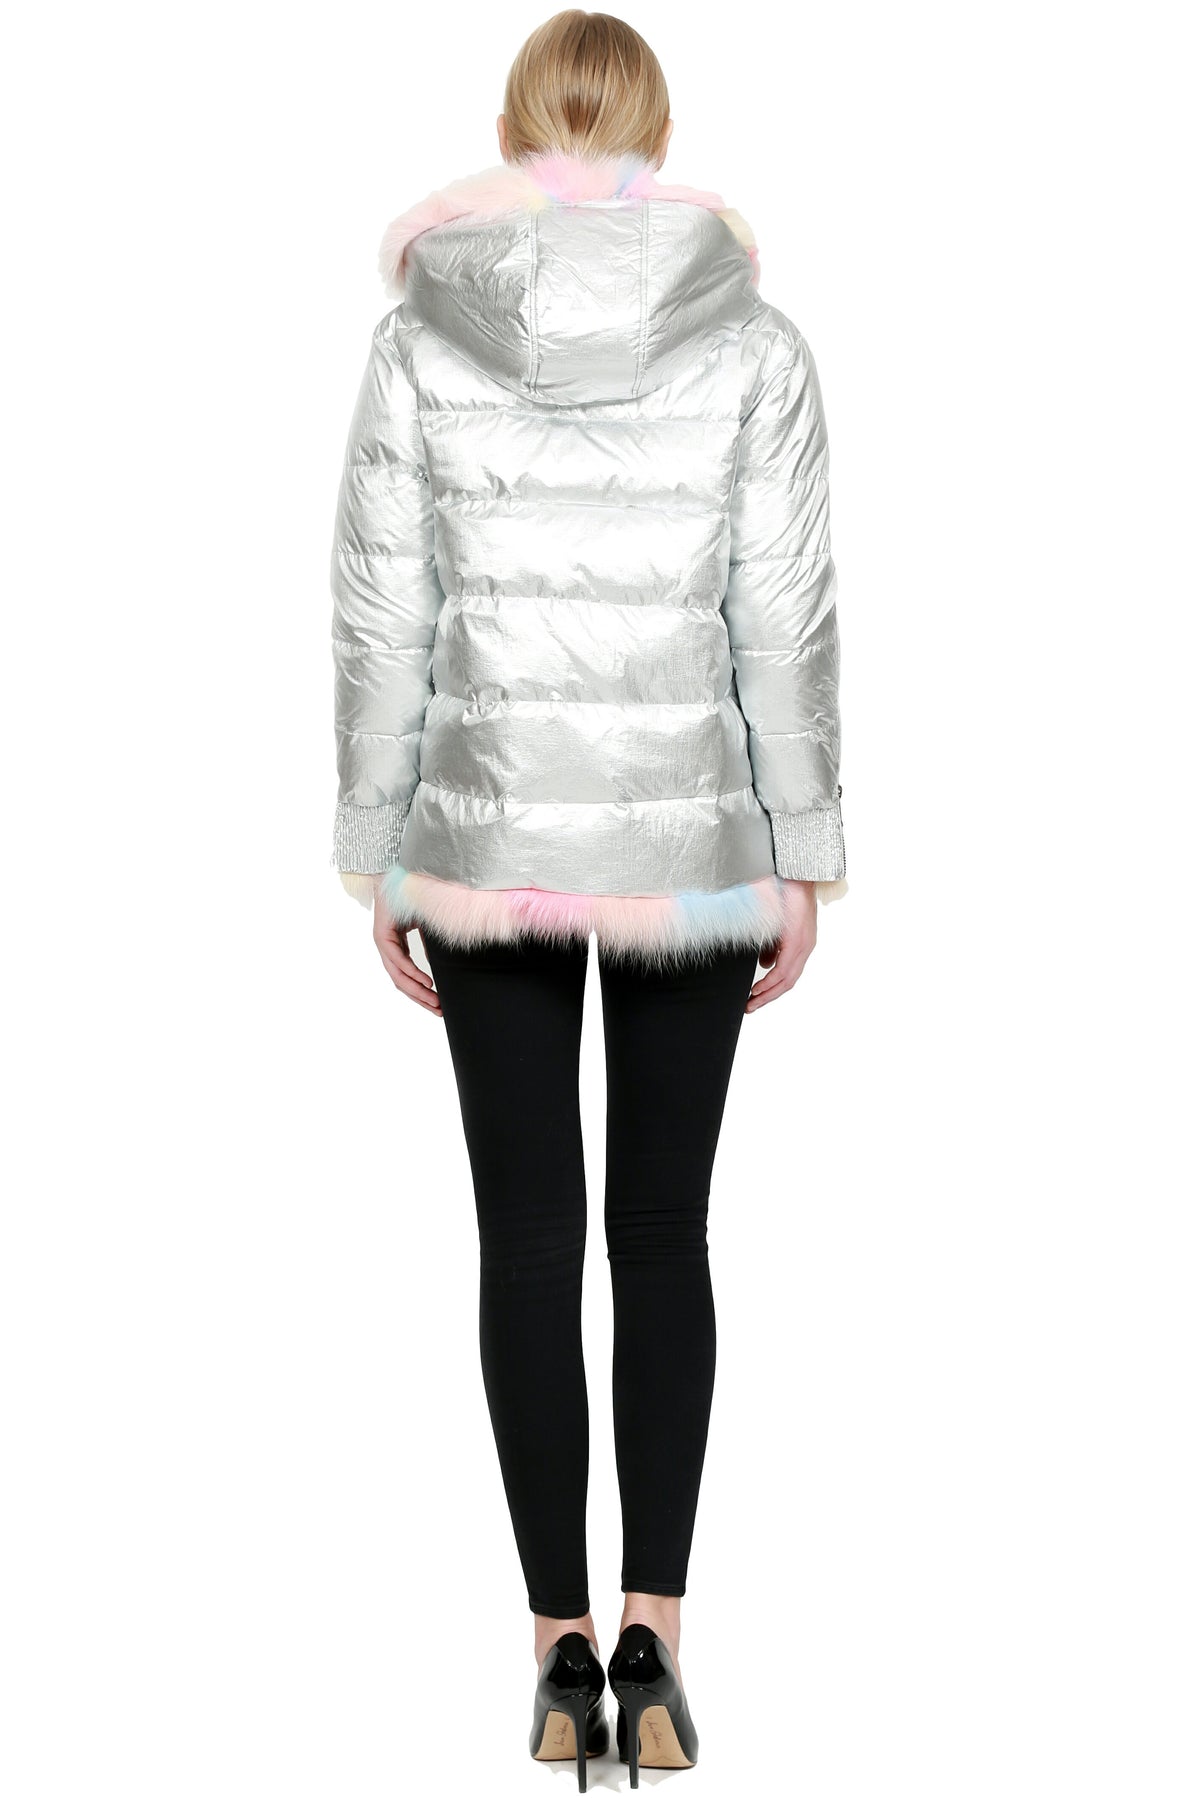 THE AIRDRIE Metallic Jacket with Multicolor Fox Fur Trim - paulamariecollection